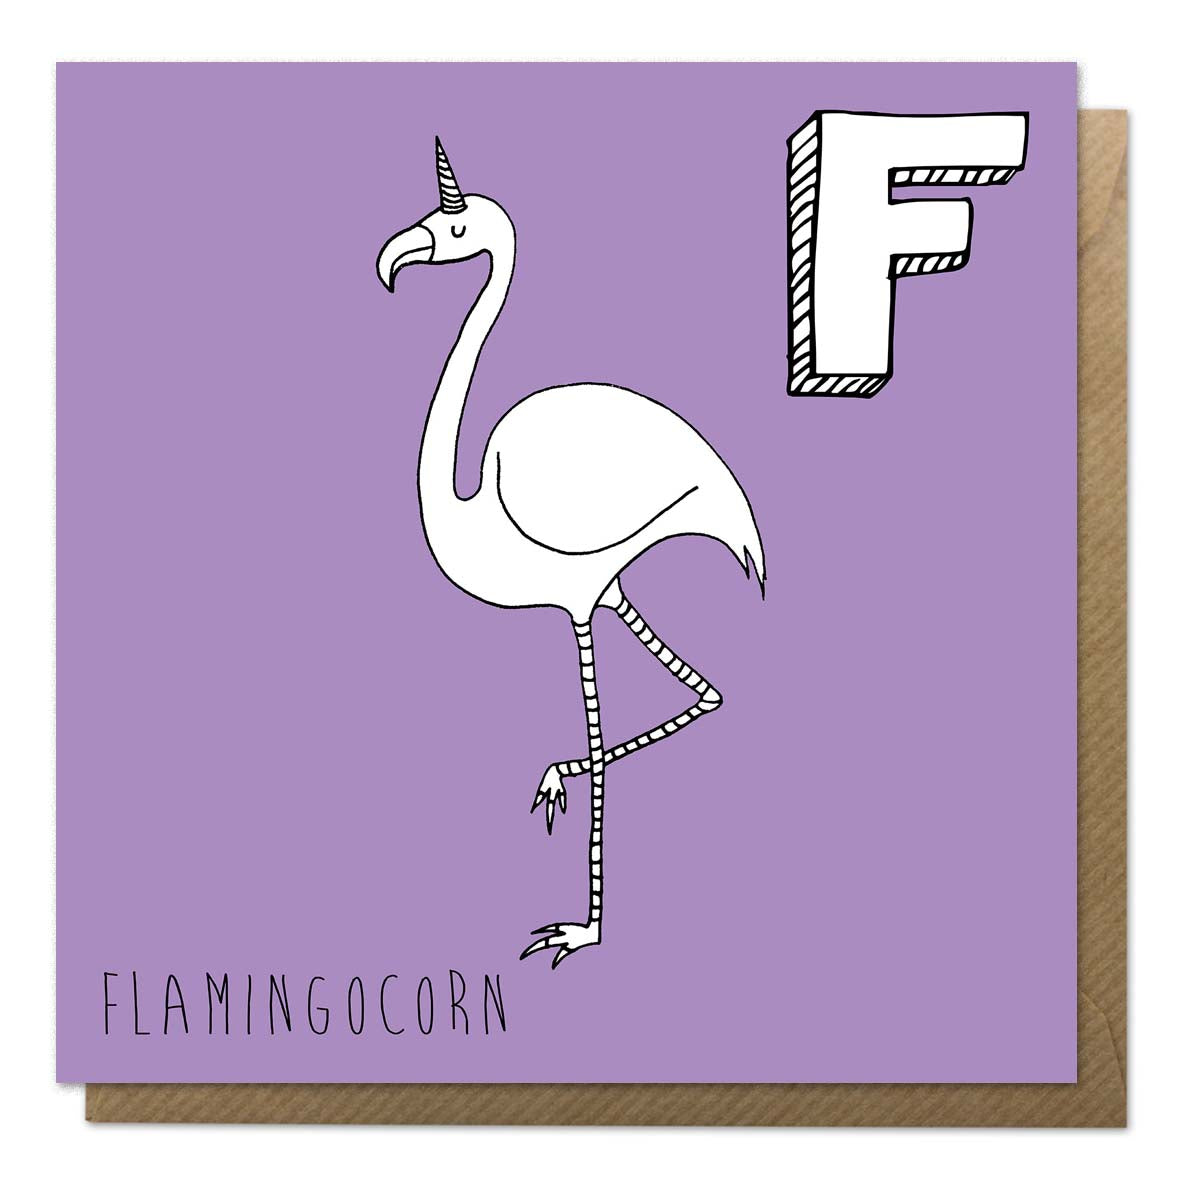 Purple greeting card with an illustration of a flamingo unicorn